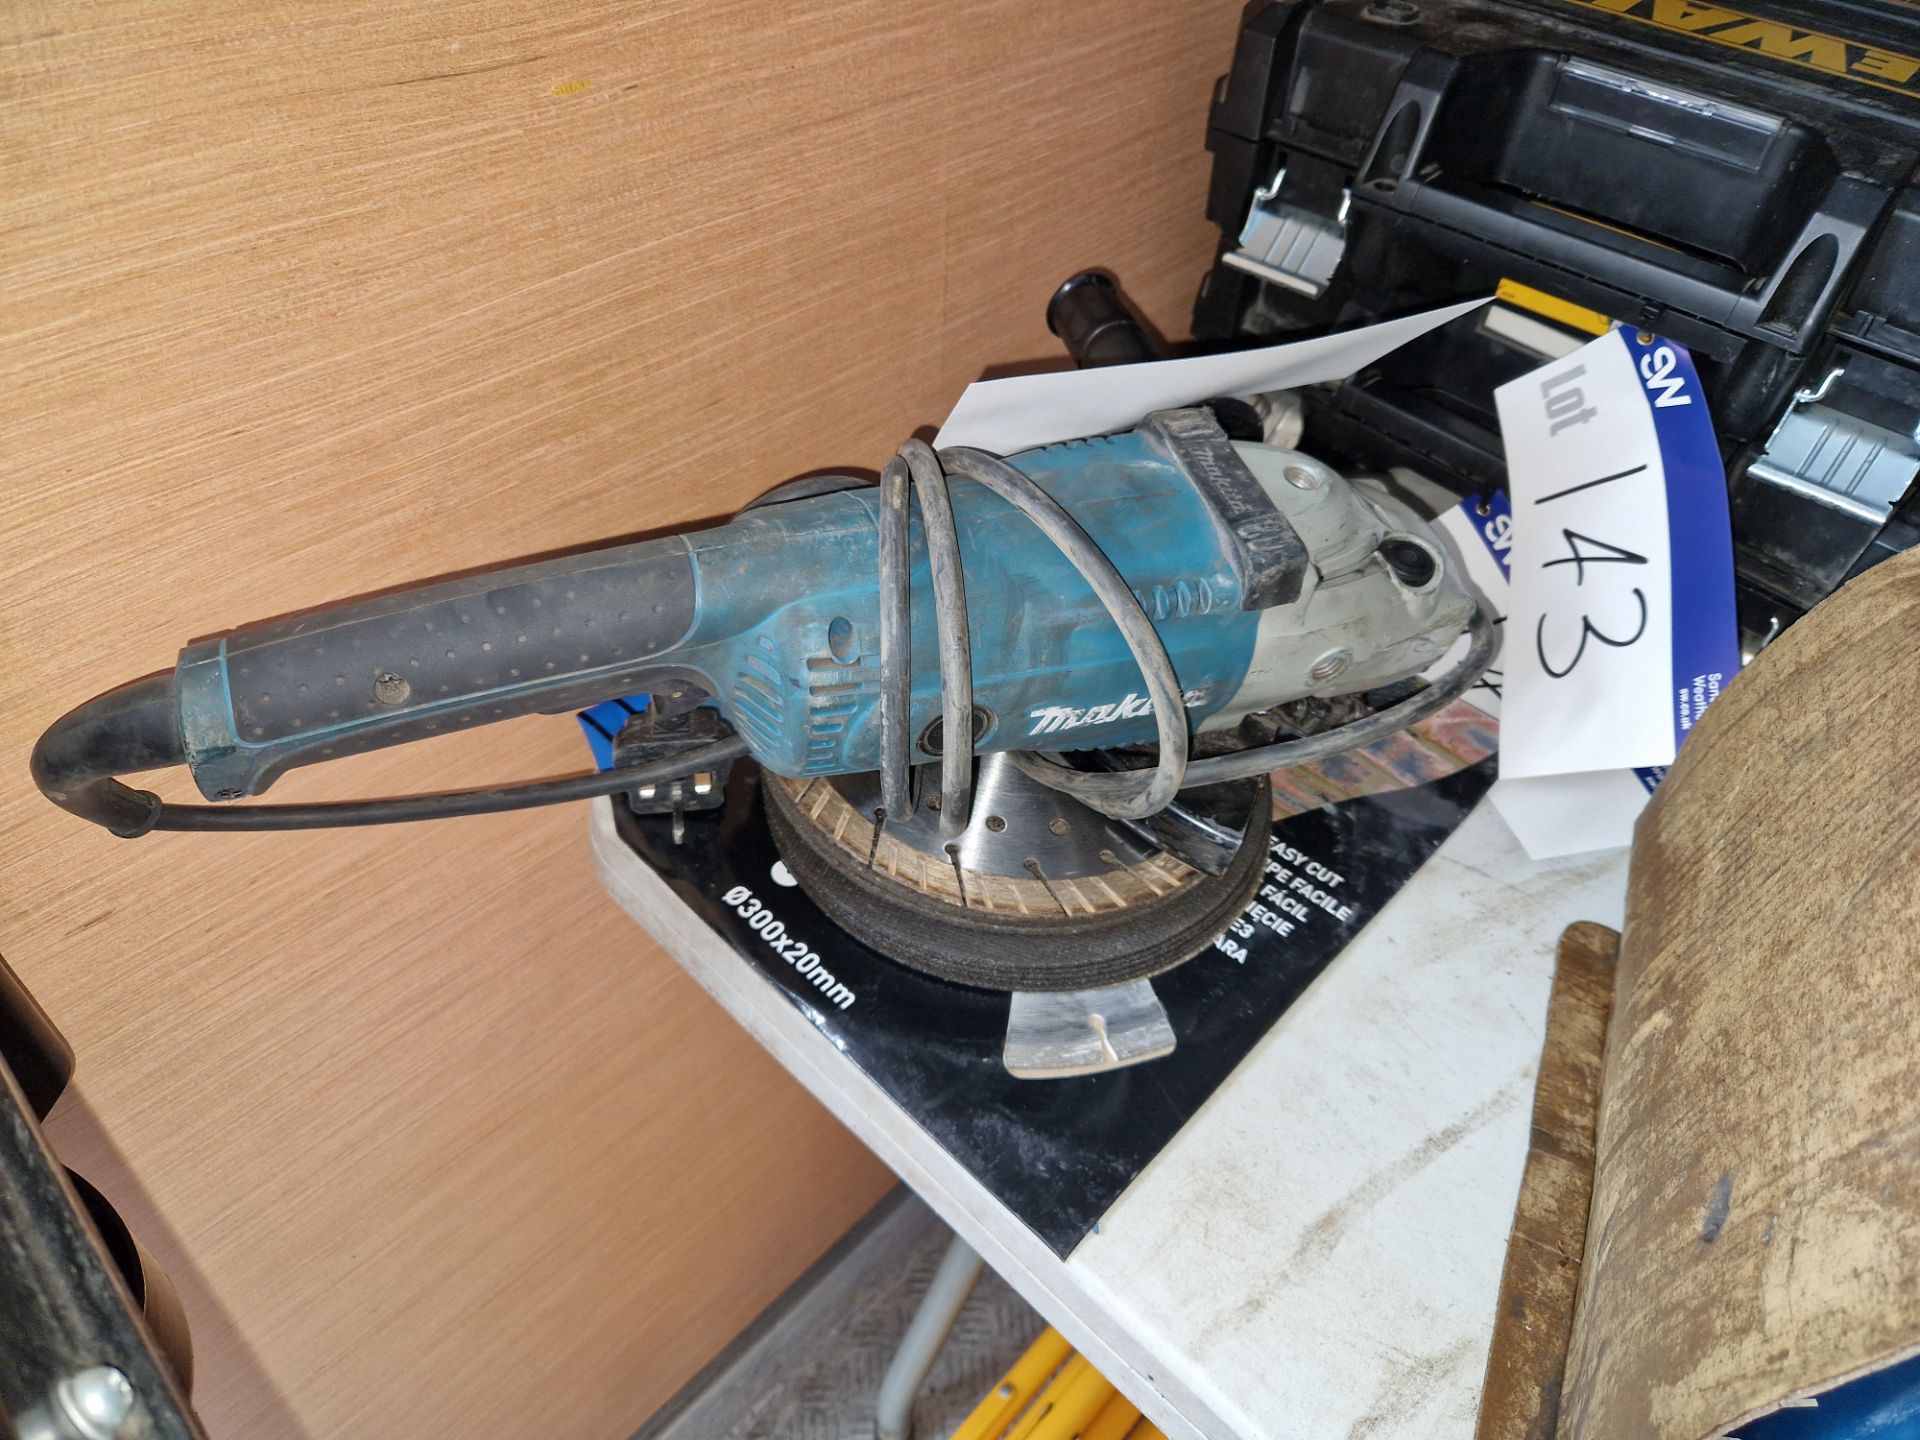 Makita GA9020 230mm Angle Grinder, 240V with Grinding Discs Please read the following important